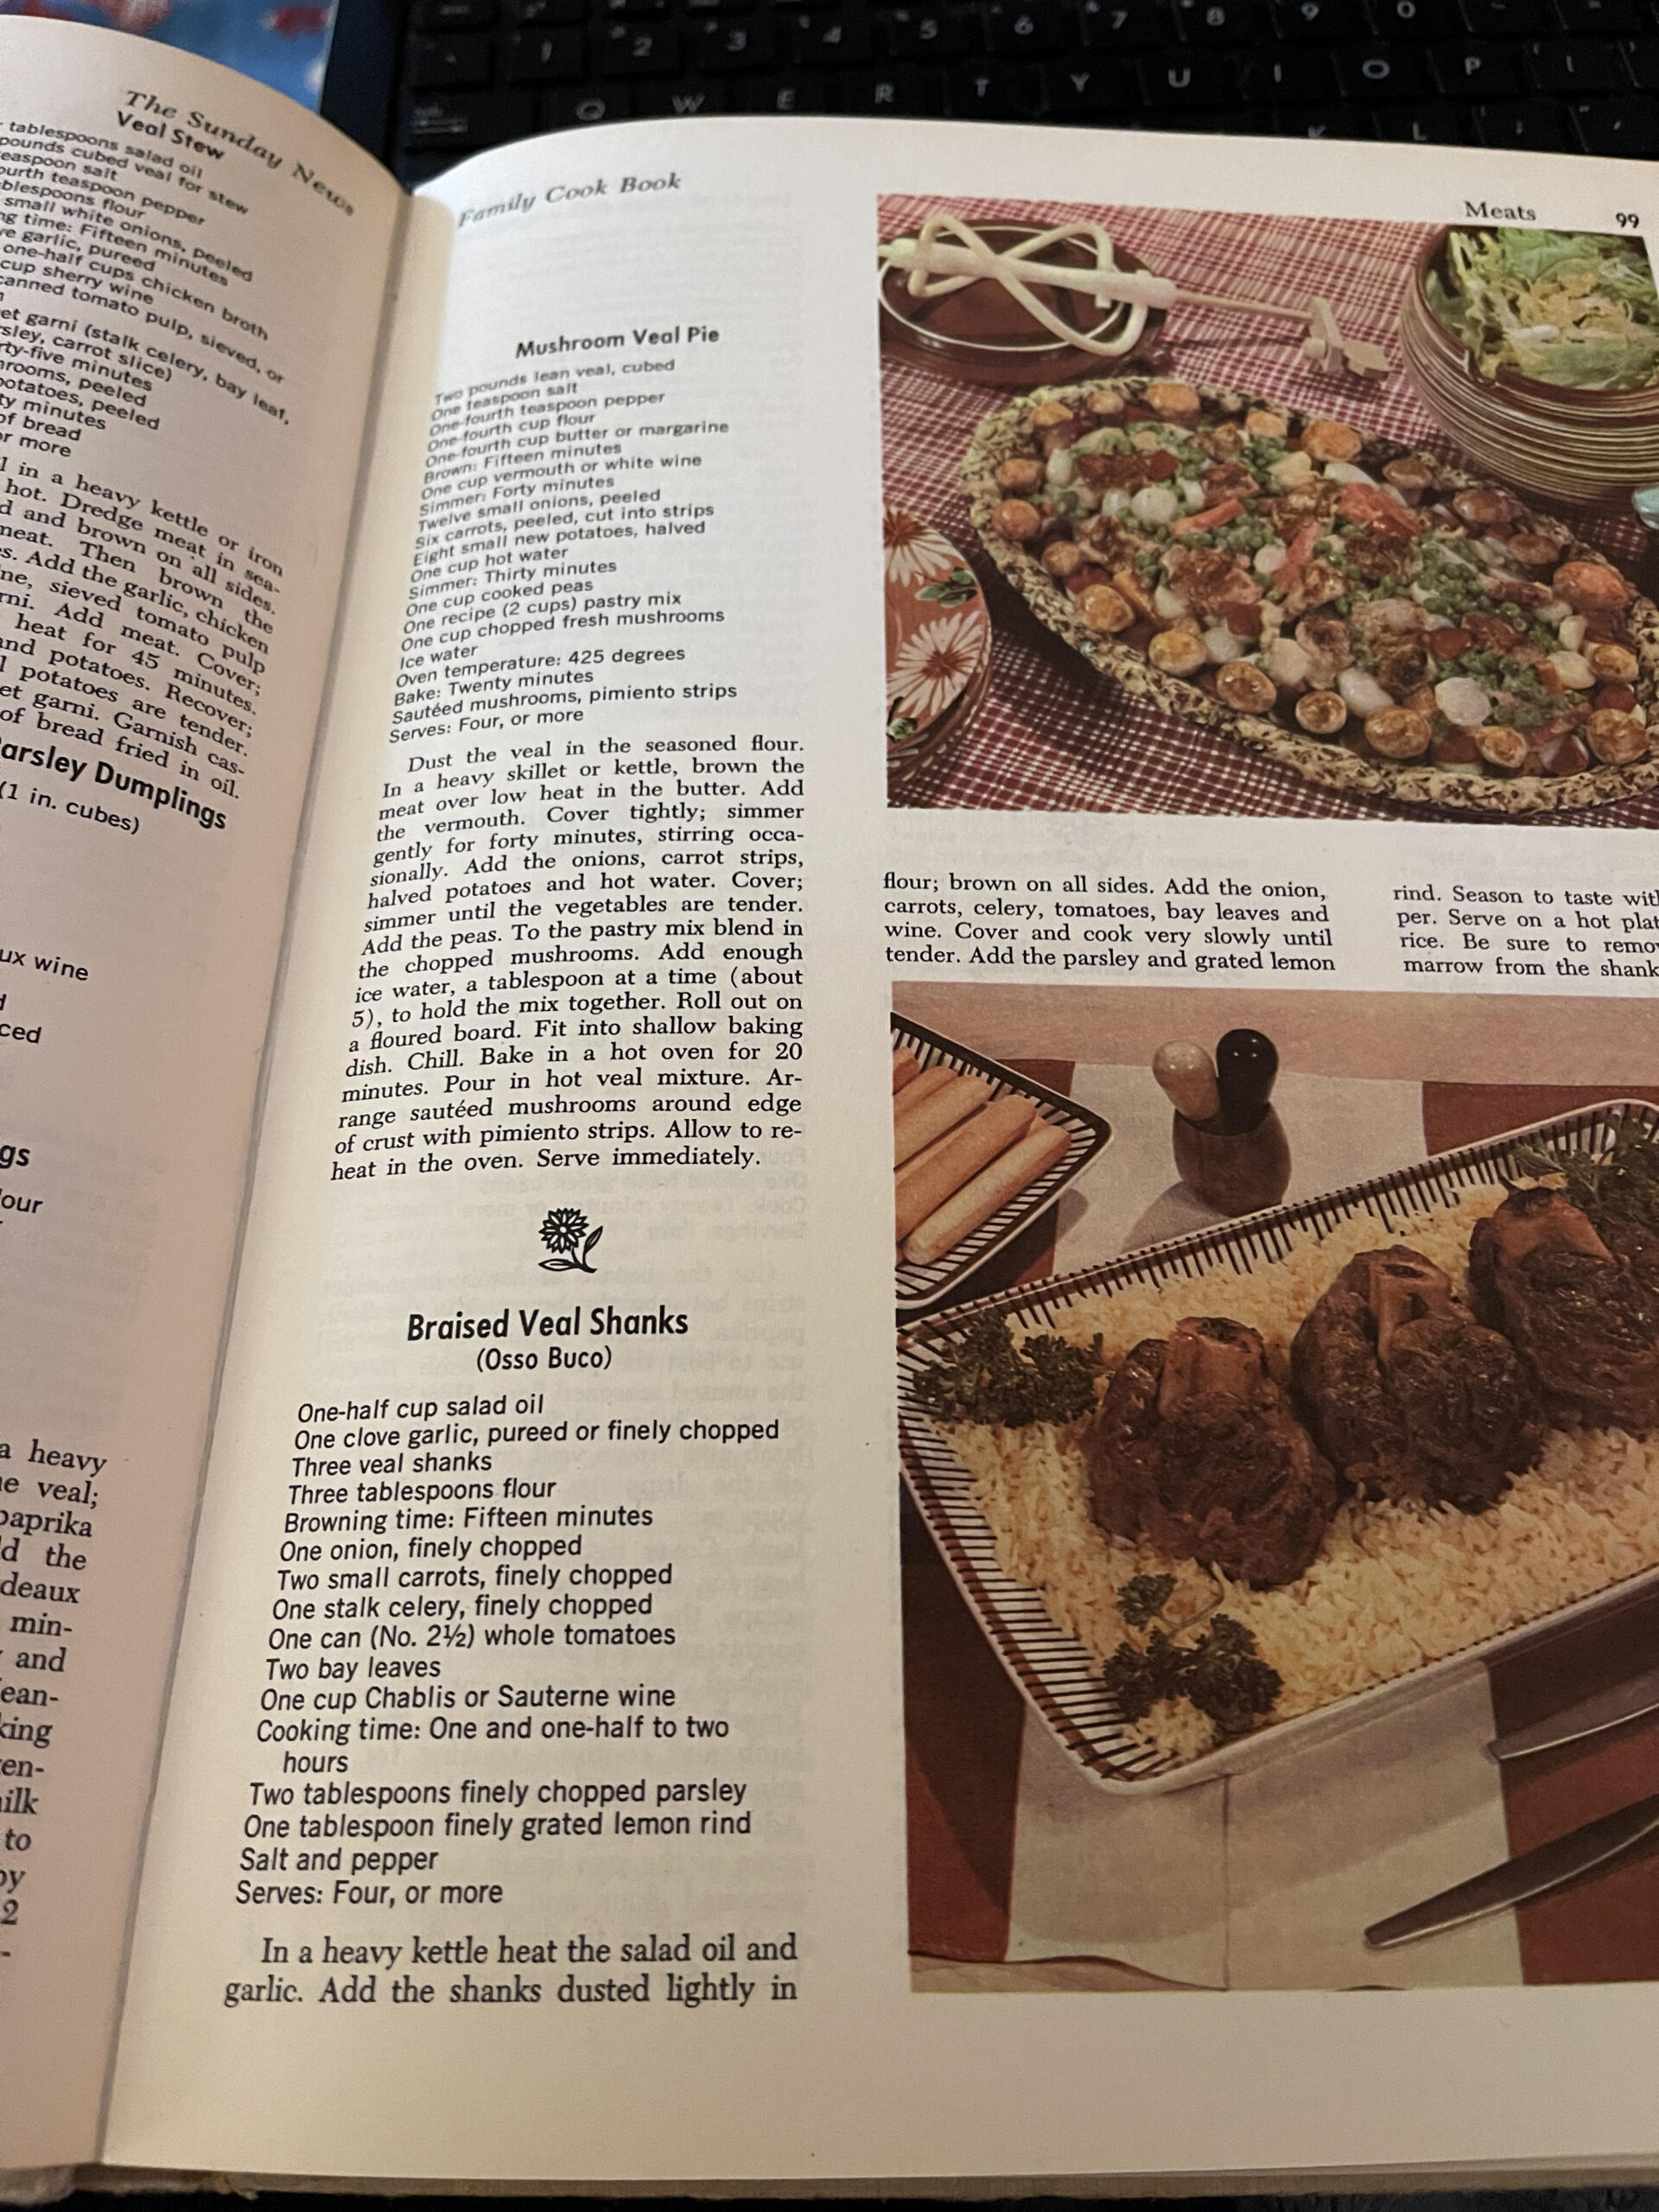 Sunday News Family Cook Book, 1962